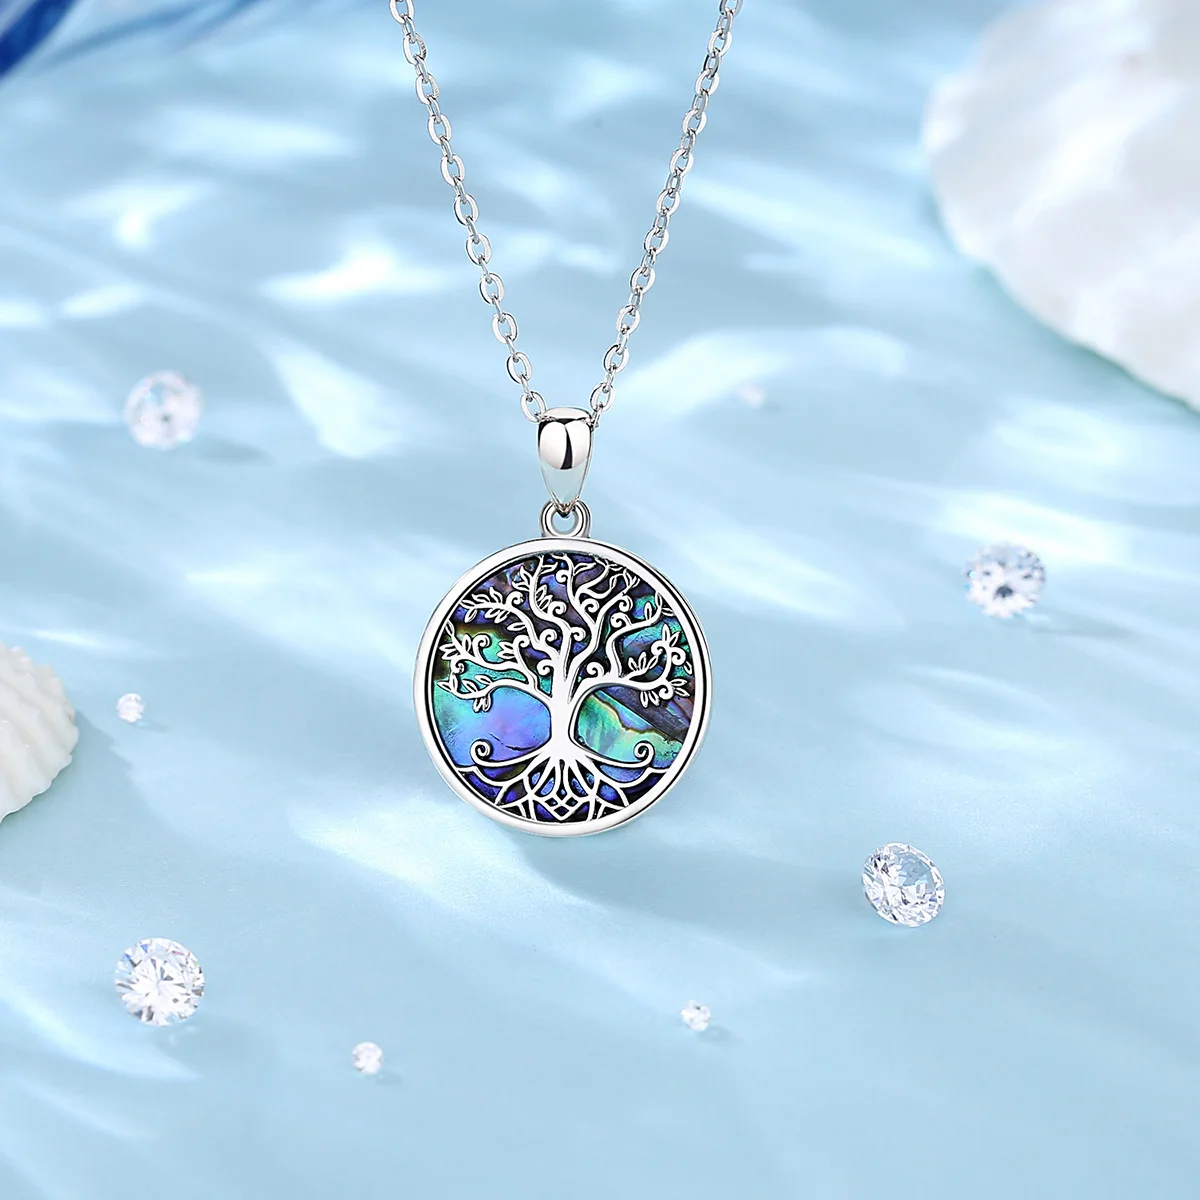 EUDORA New 925 Sterling Silver Tree of Life Pendant Necklace Abalone Shell Jewelry Elegant Fashion Party Gift